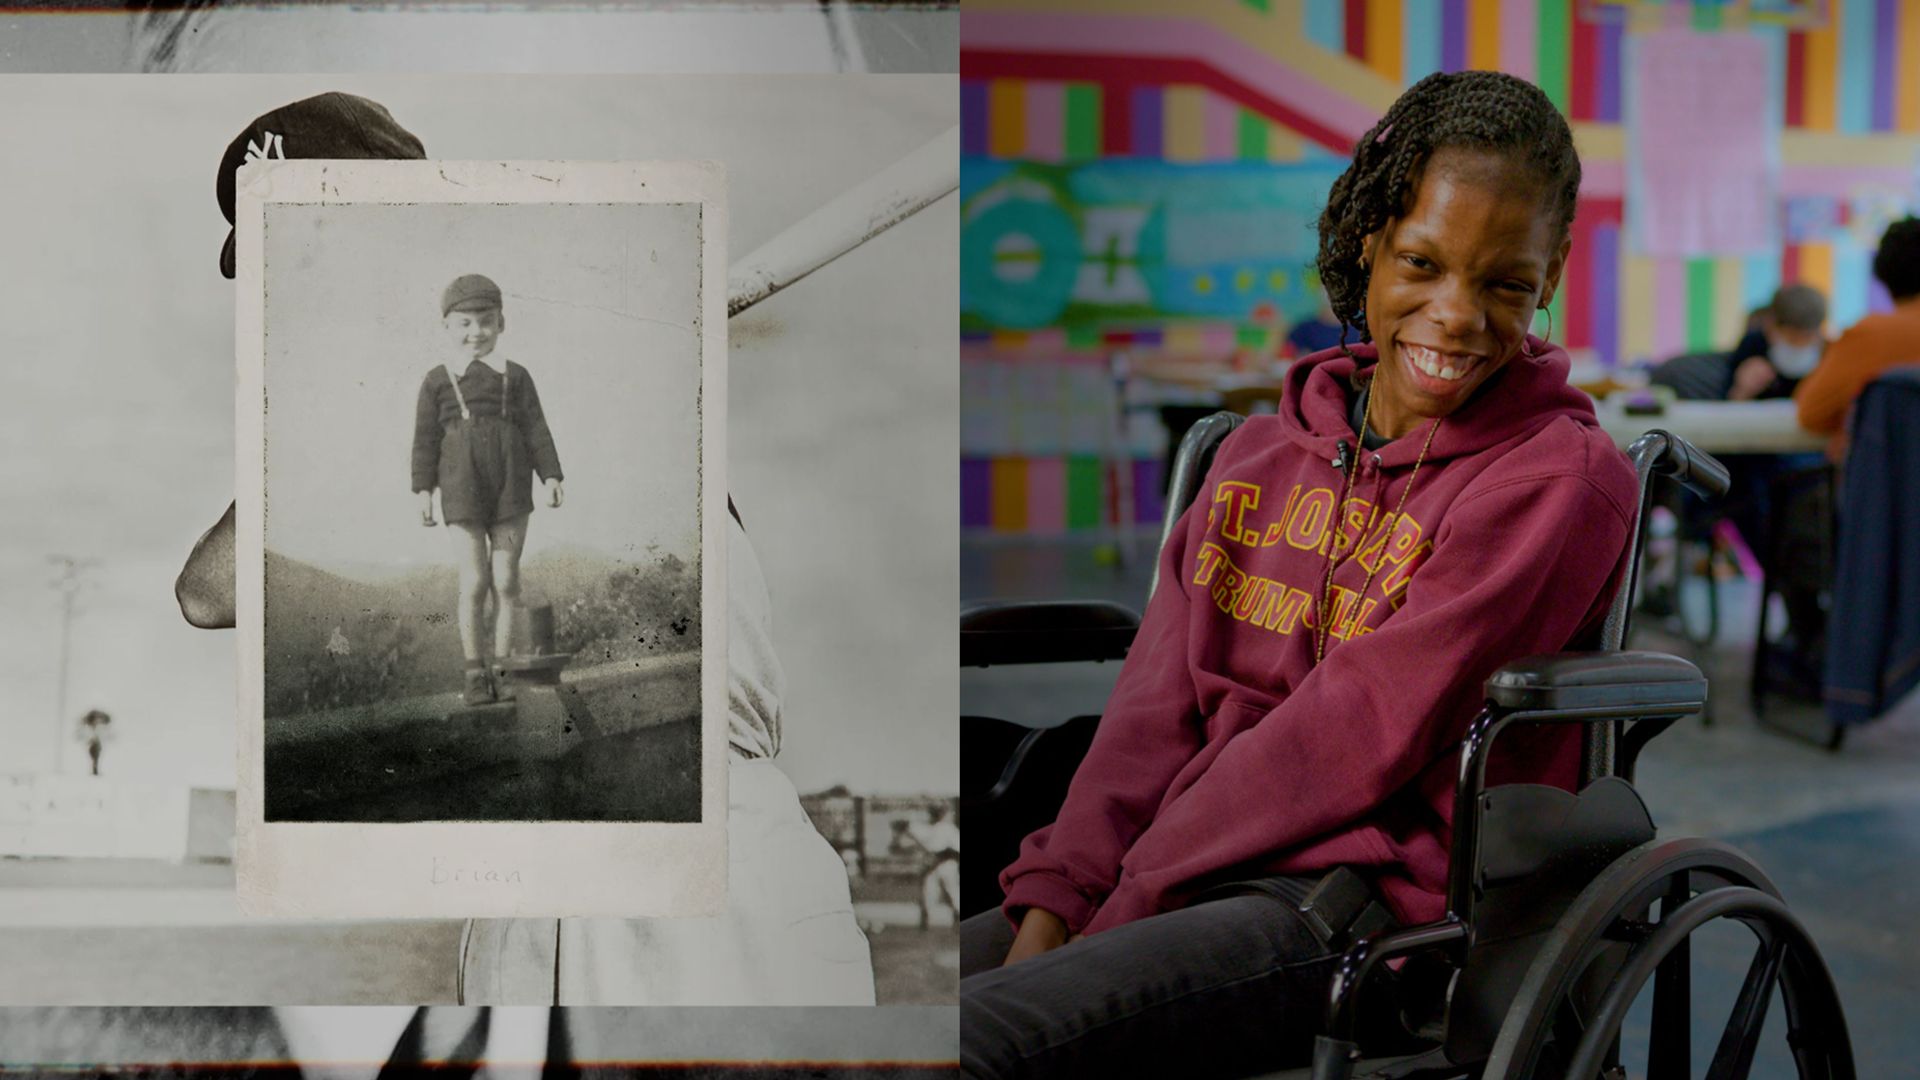 A childhood photo of Brian Kennedy next to a photo of a woman smiling in a wheelchair.